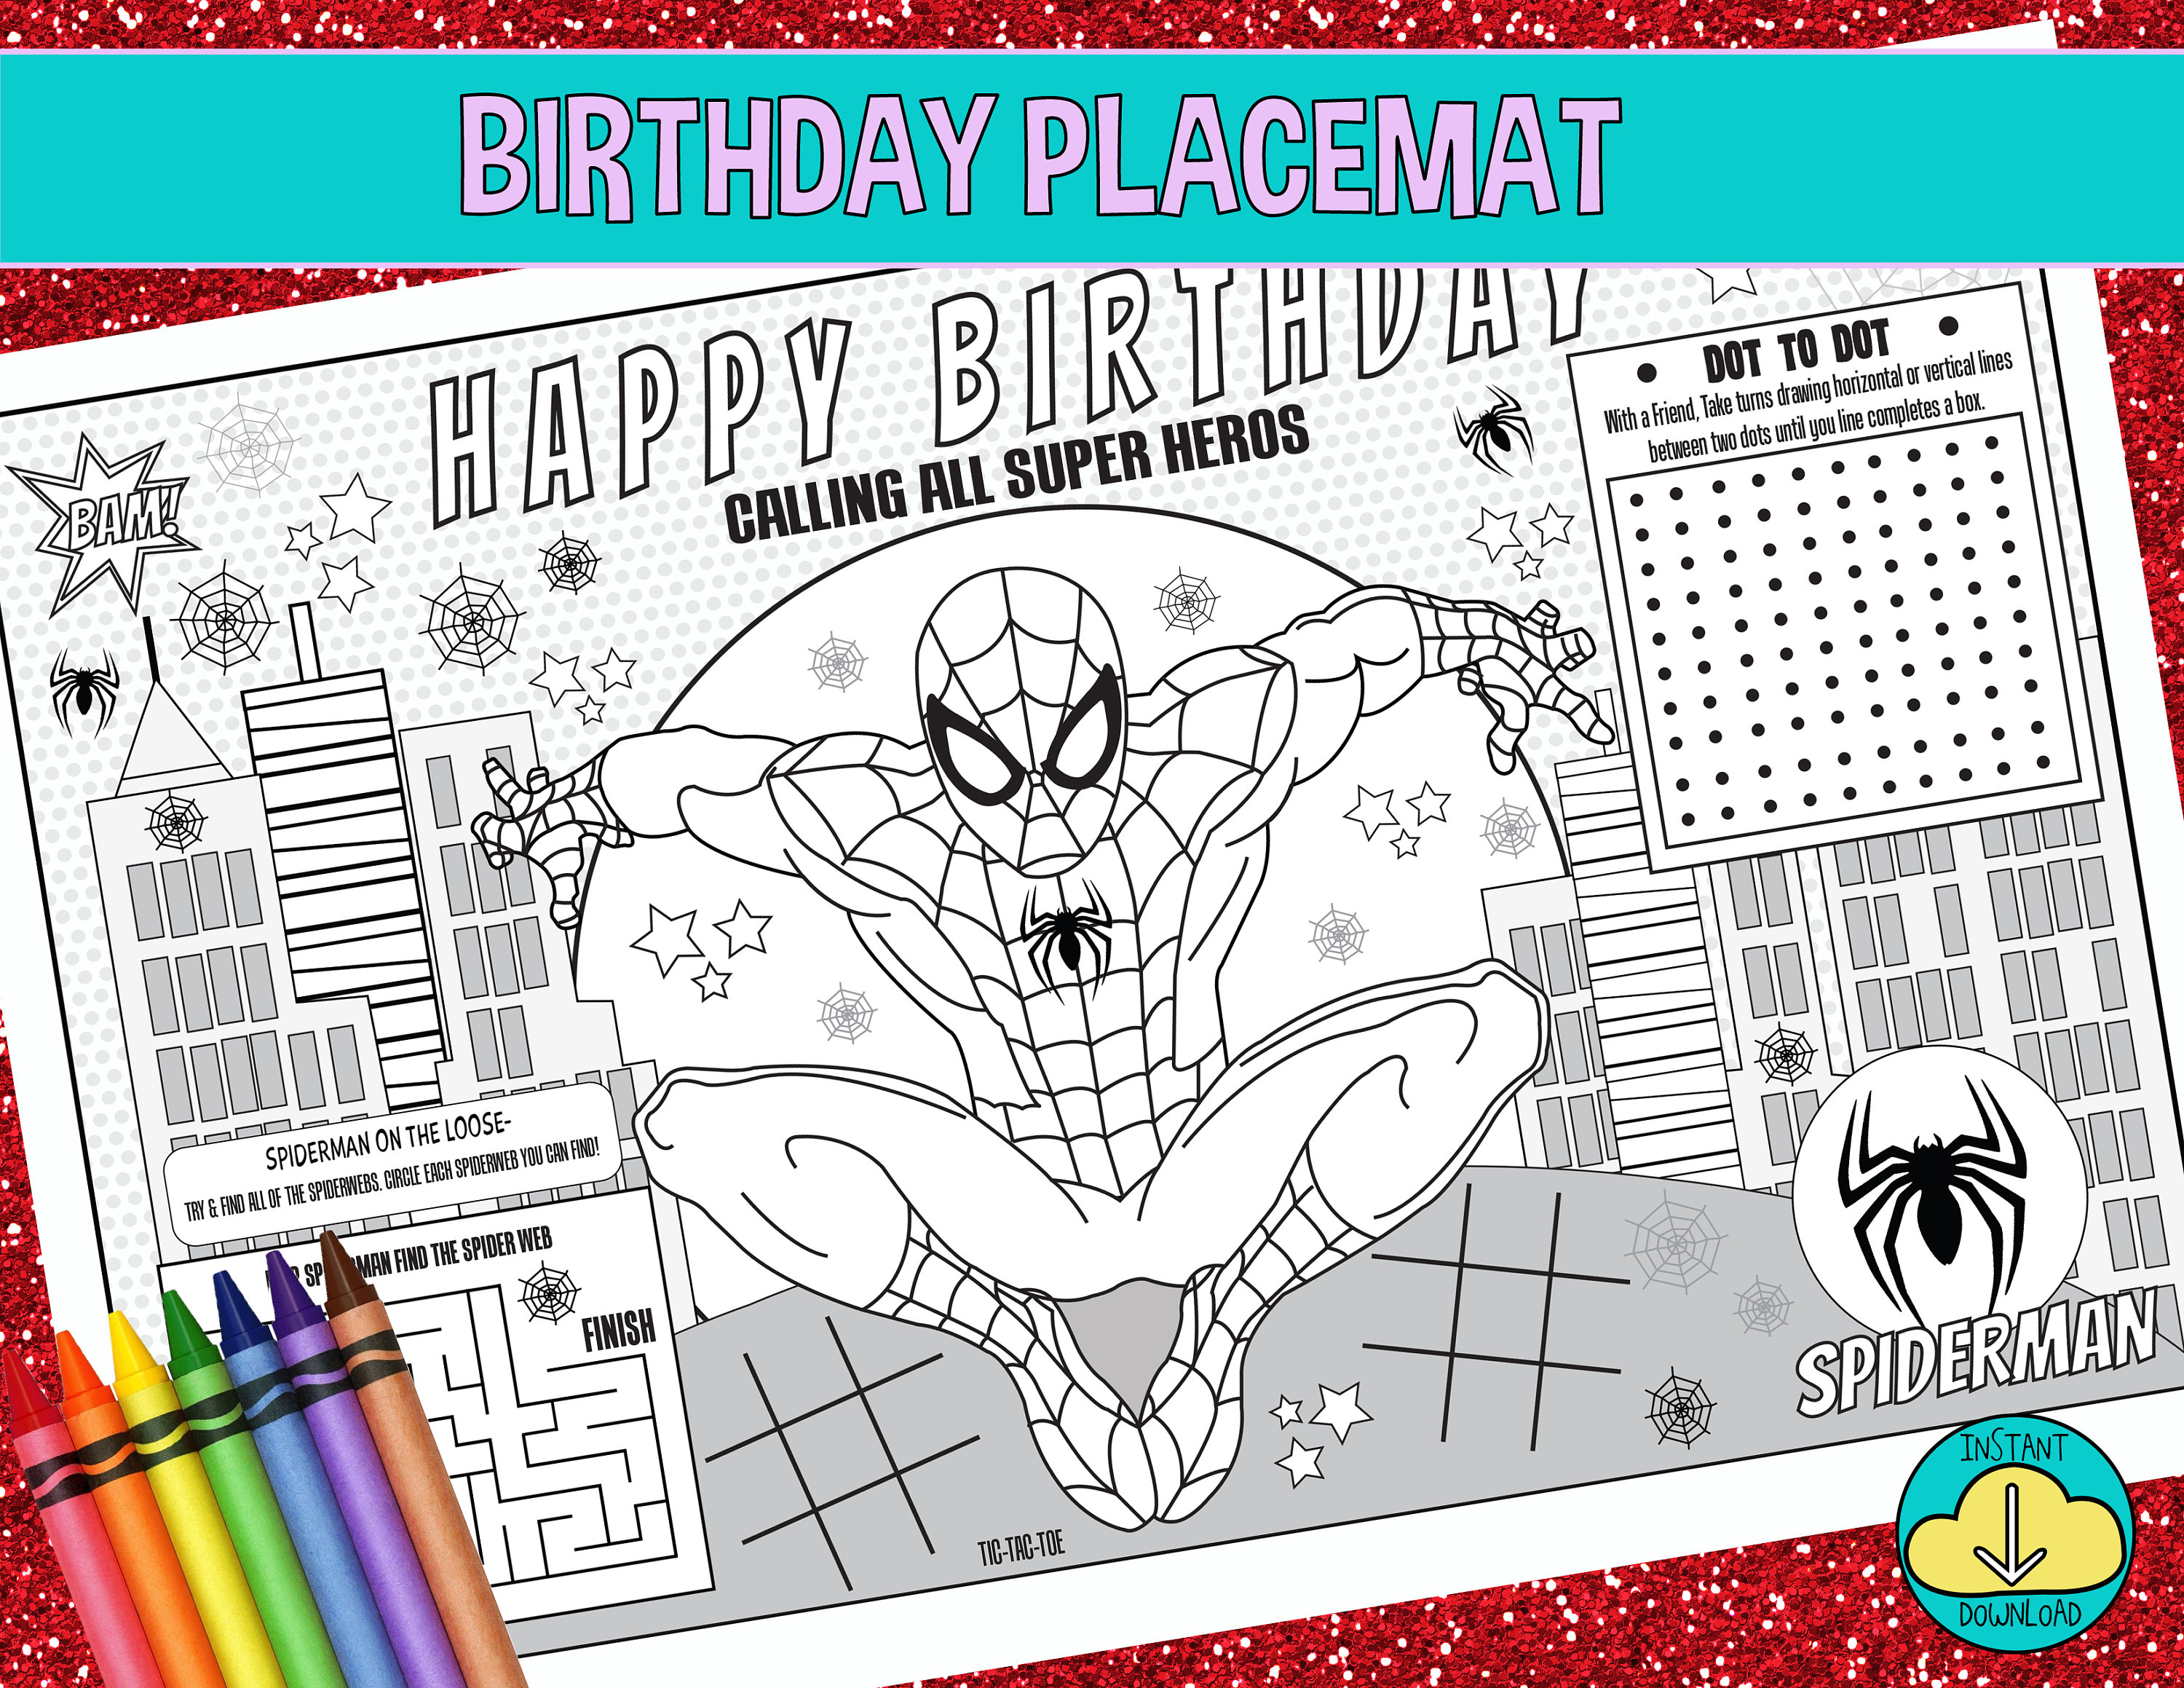 Spiderman, Spiderman Mini Coloring Pages and Crayons, Spiderman